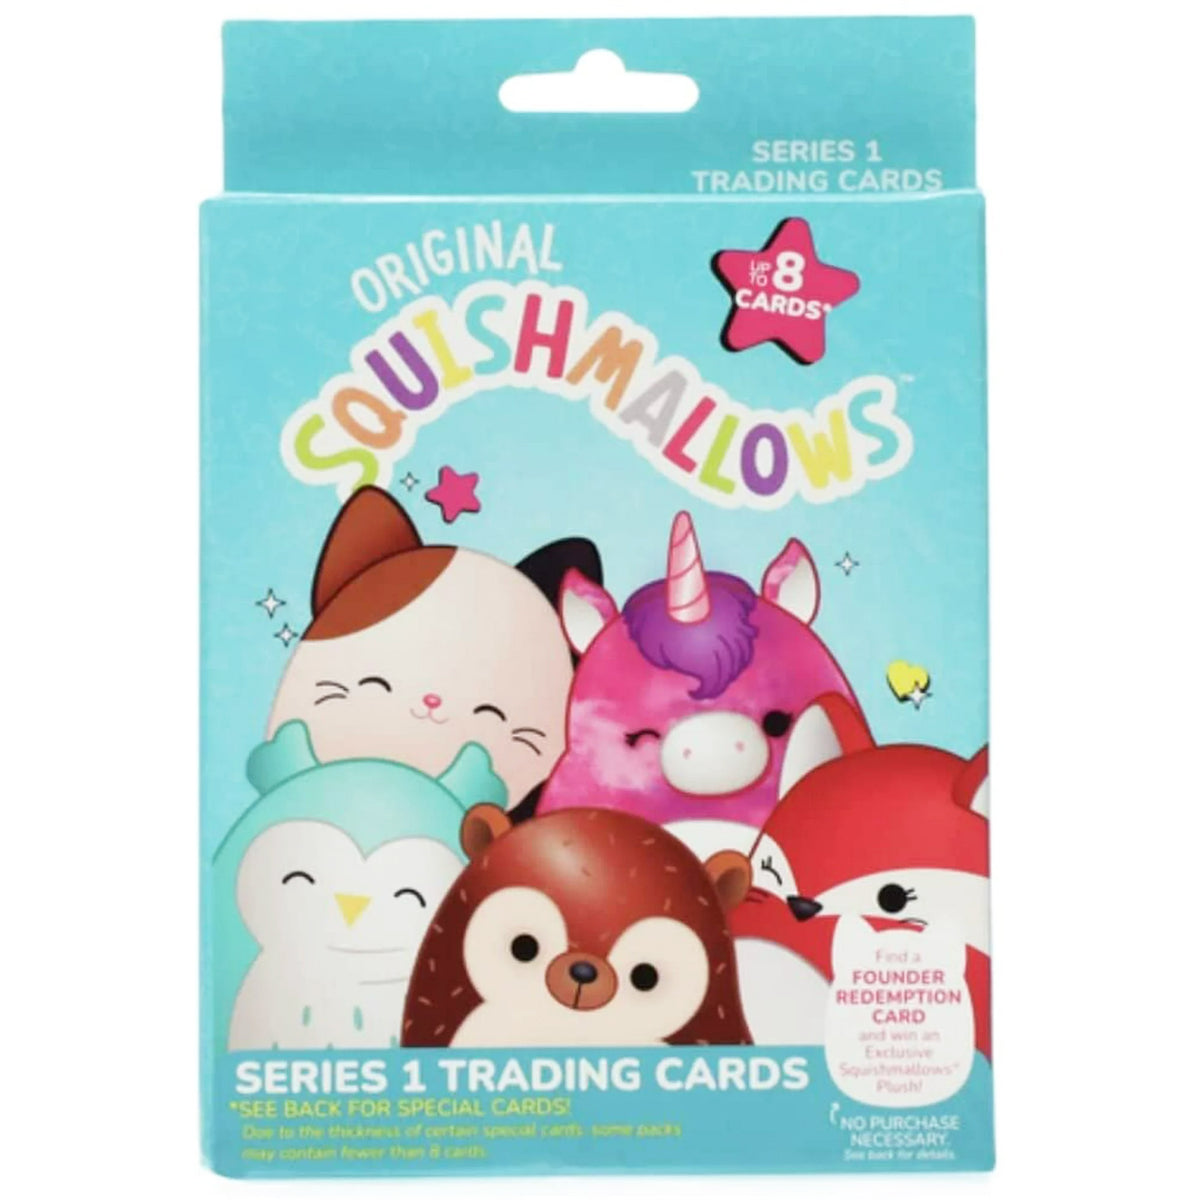 Squishmallow Series 1 Trading Cards Booster Pack